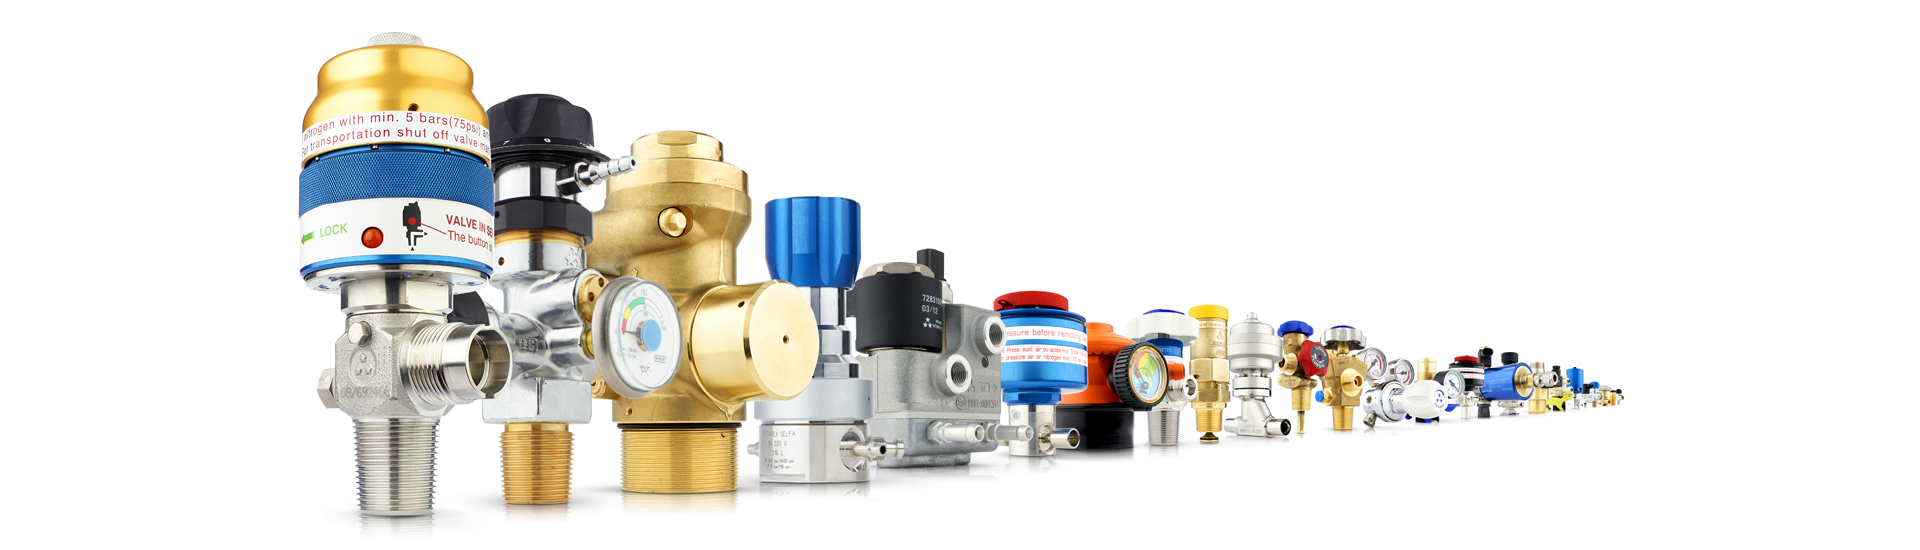 High quality Rotarex gas control valves, pressure regulators &f 
          fittings give confidence down all product lines.